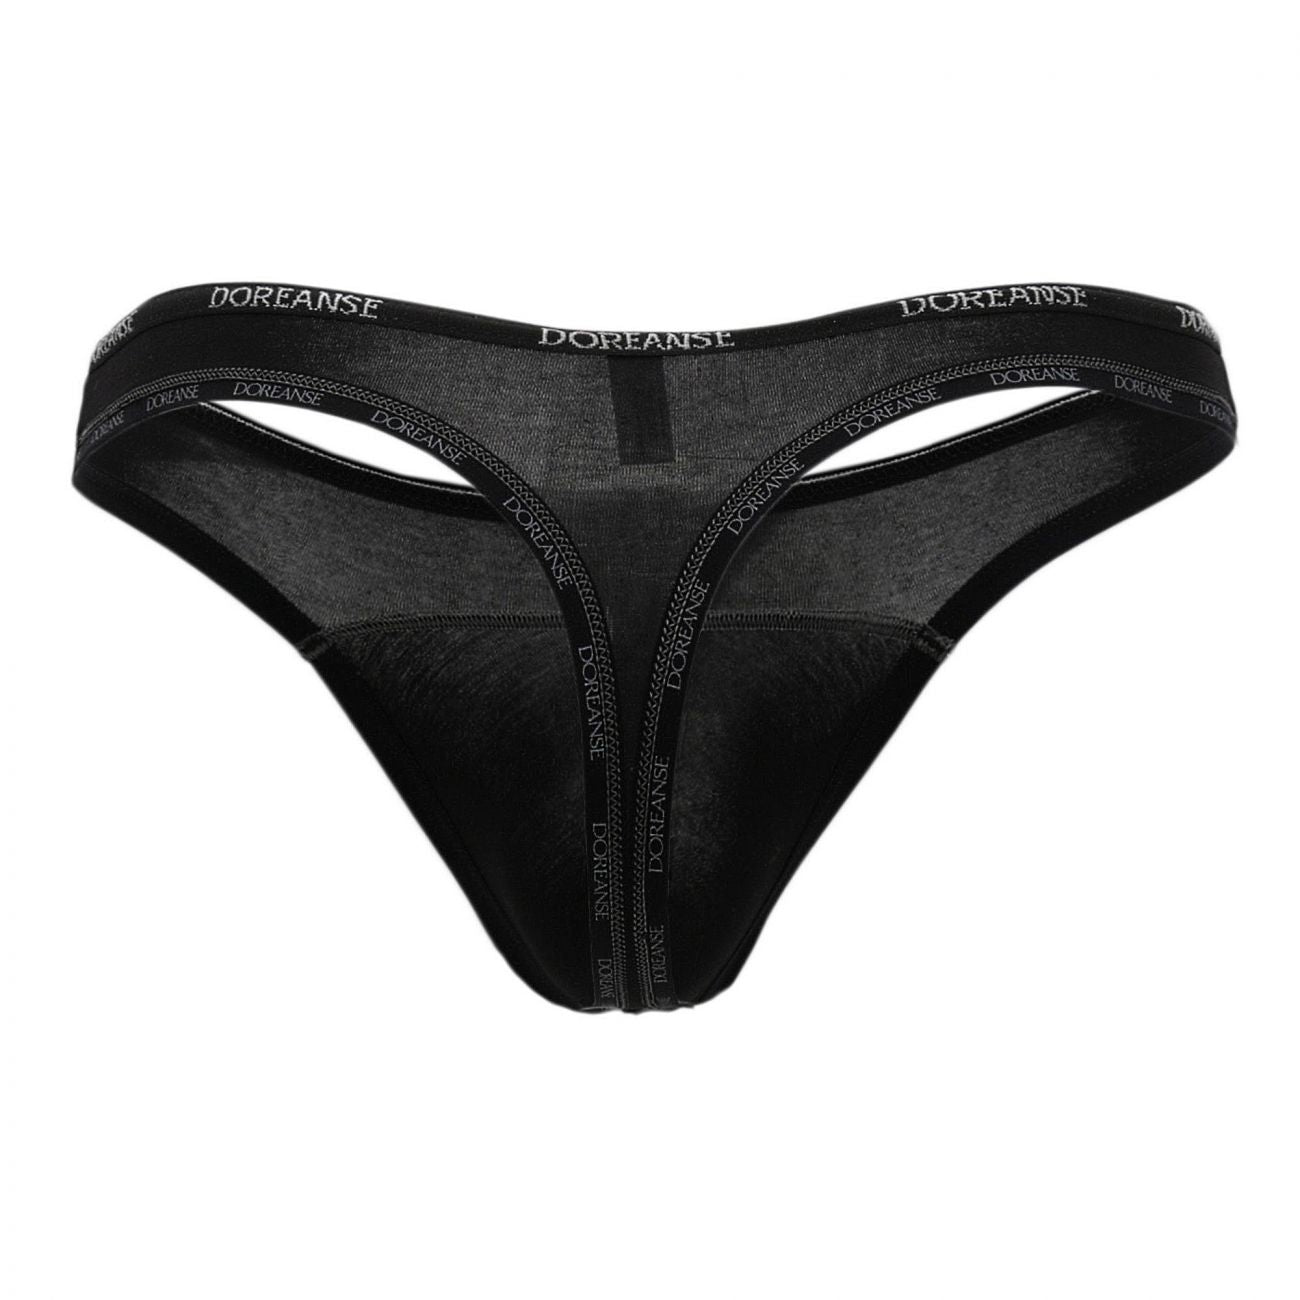 under-yours - Naked Thong - Doreanse - Mens Underwear